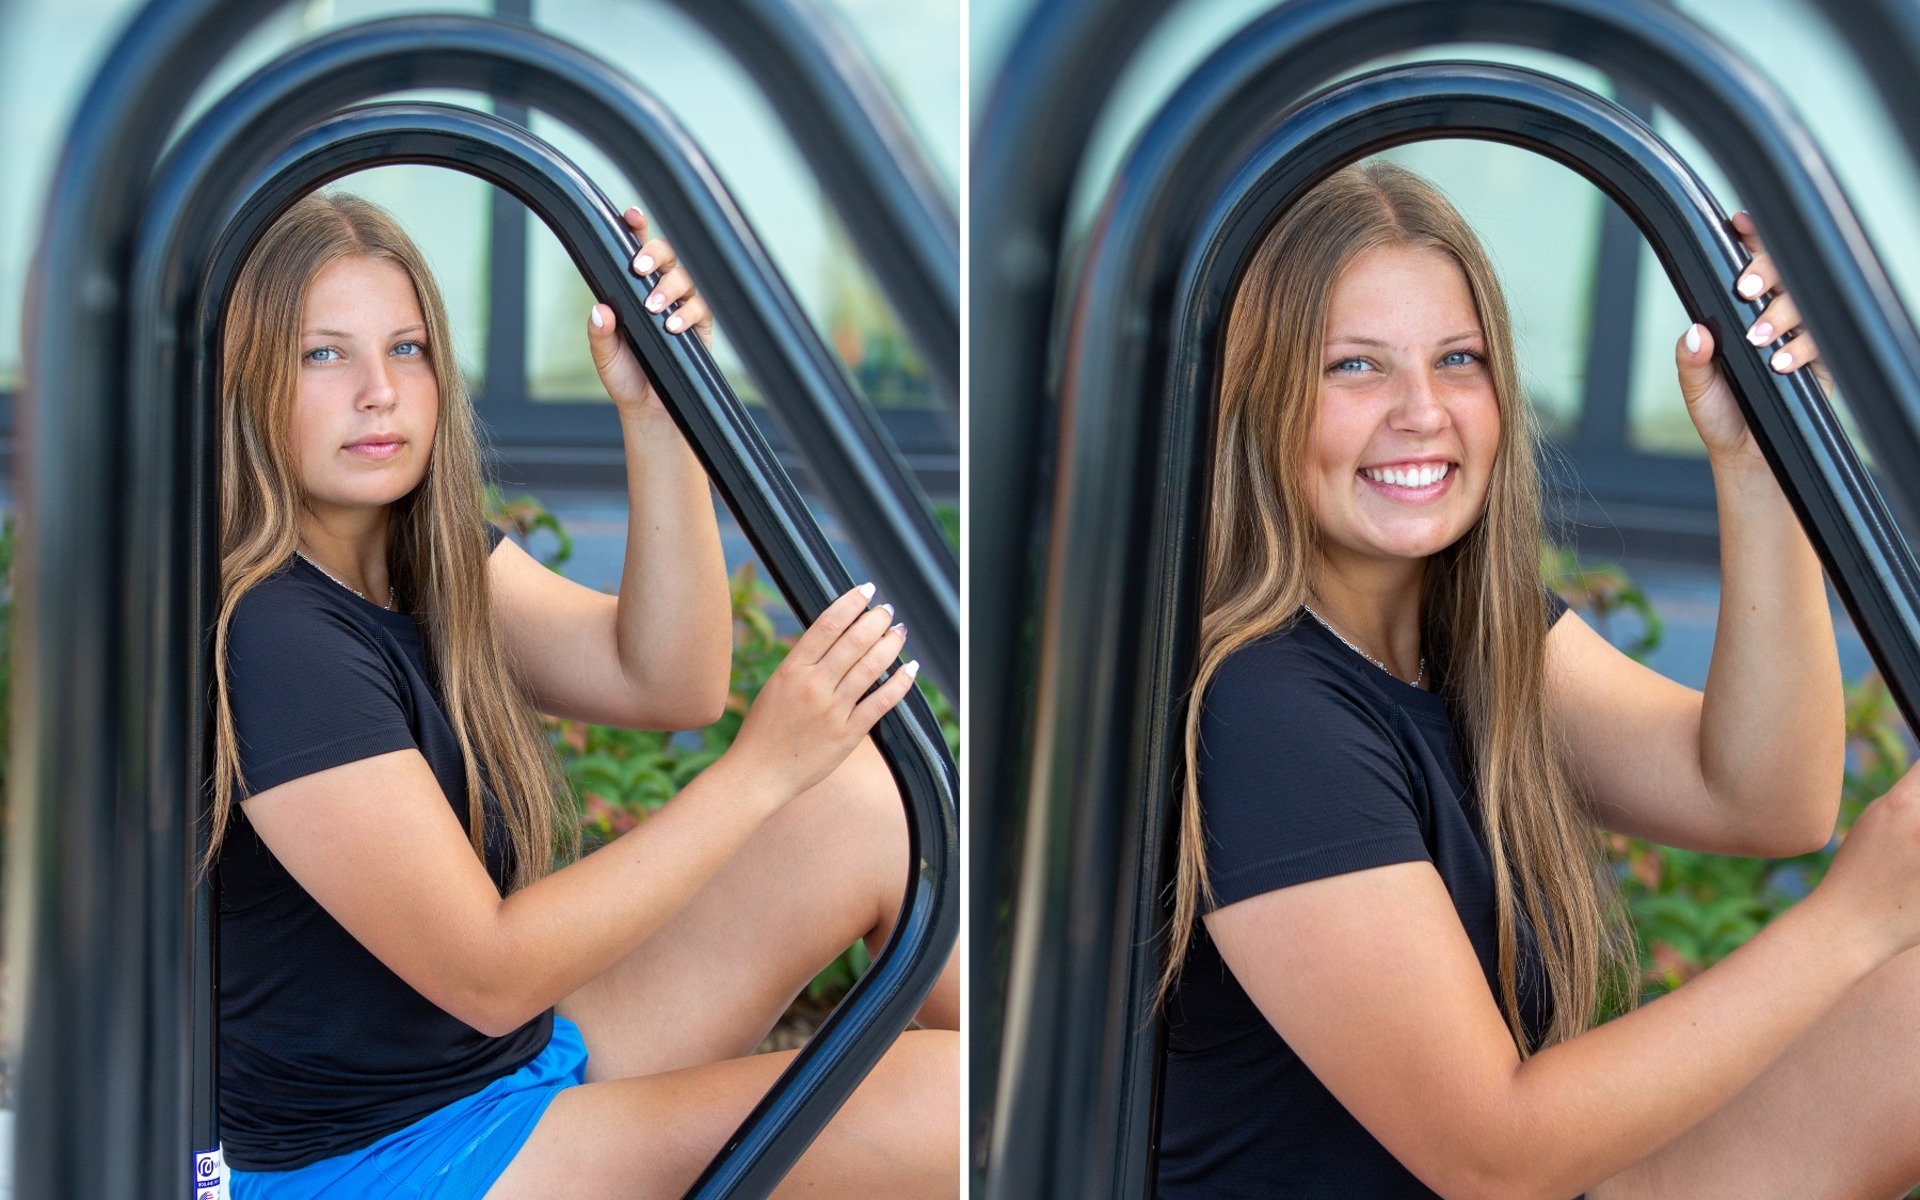 hs senior girl sits inside a bicycle rack looking down the row